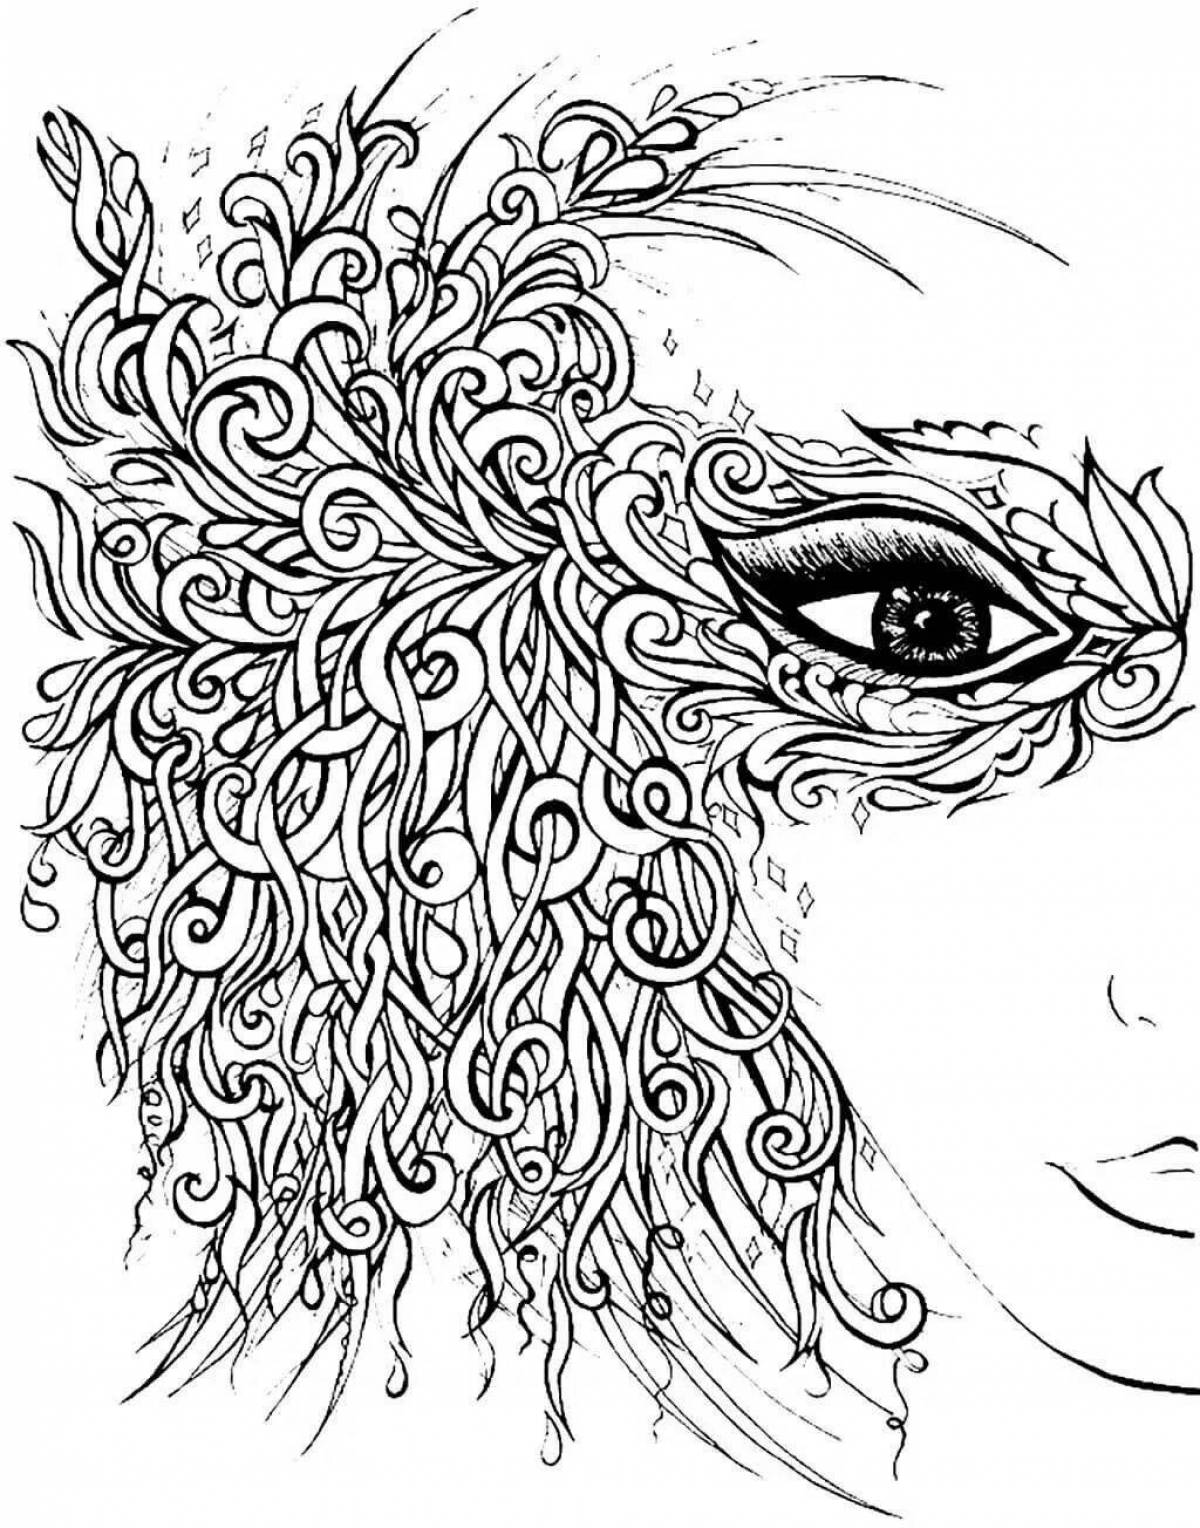 Charming anti-stress coloring book for women